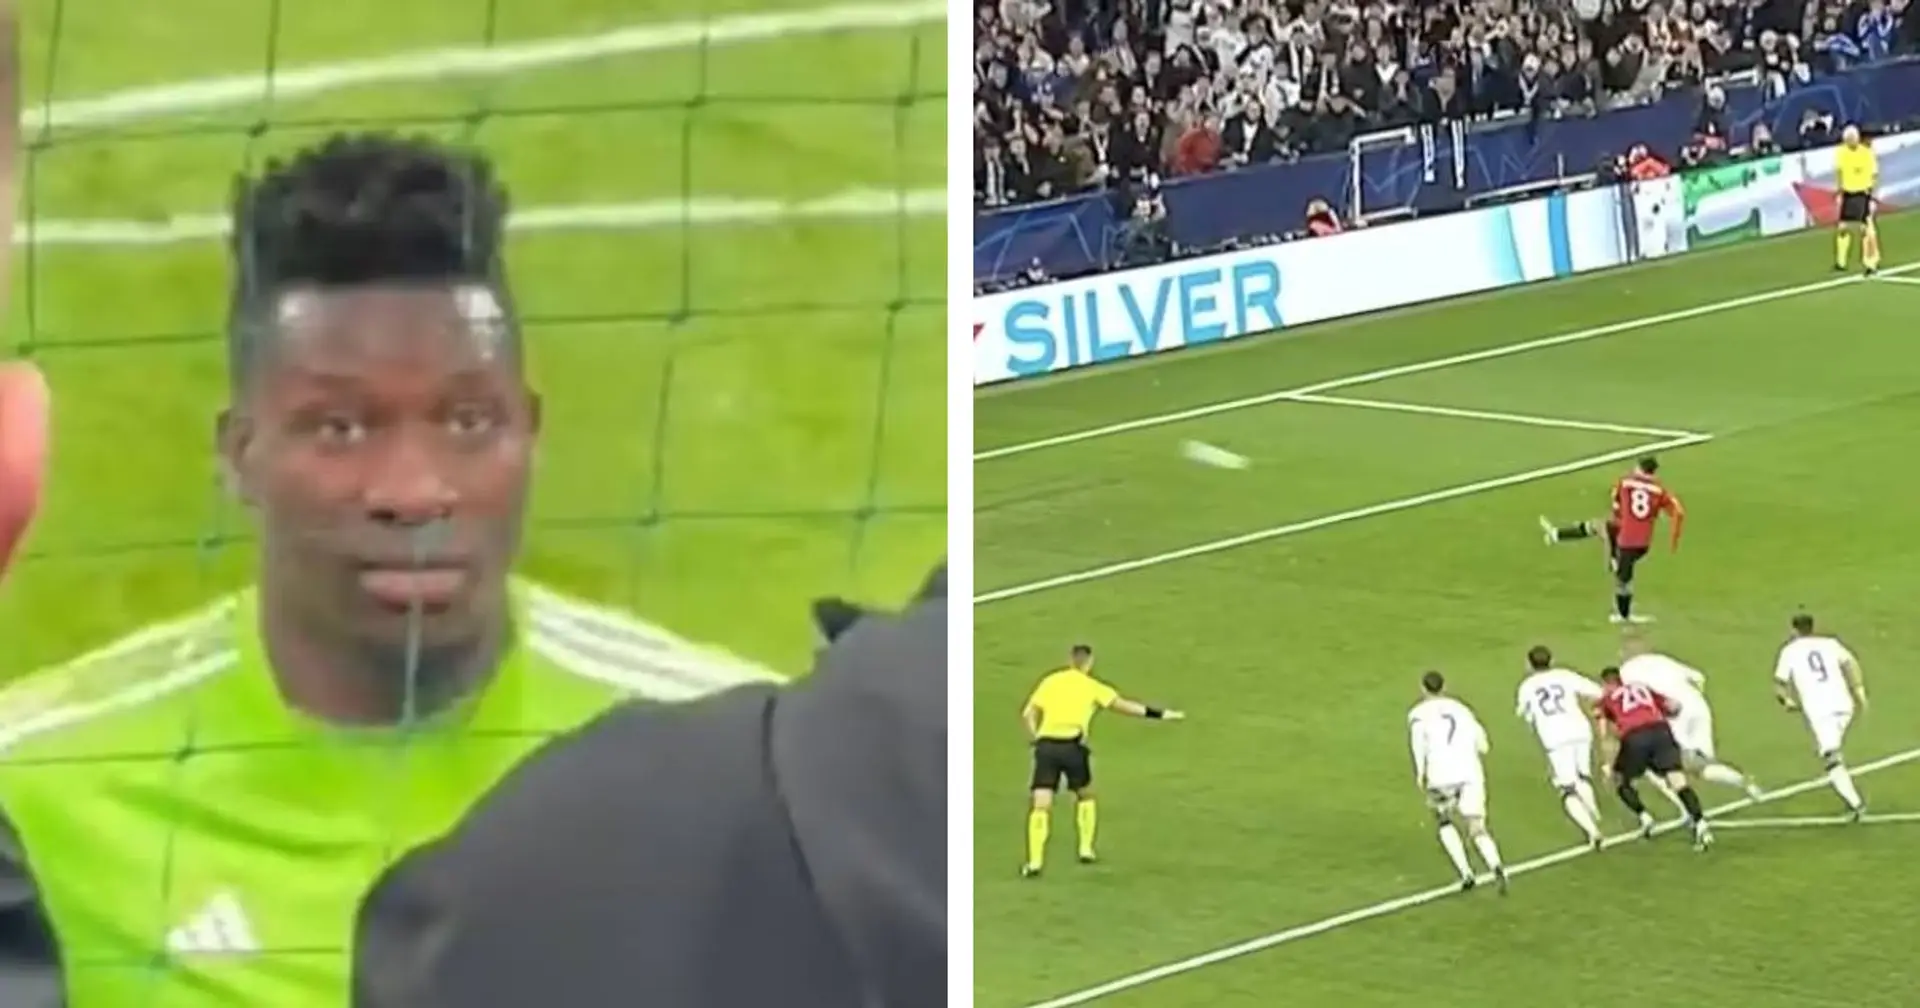 Baffling footage emerges of Andre Onana staring into stands during Bruno Fernandes penalty